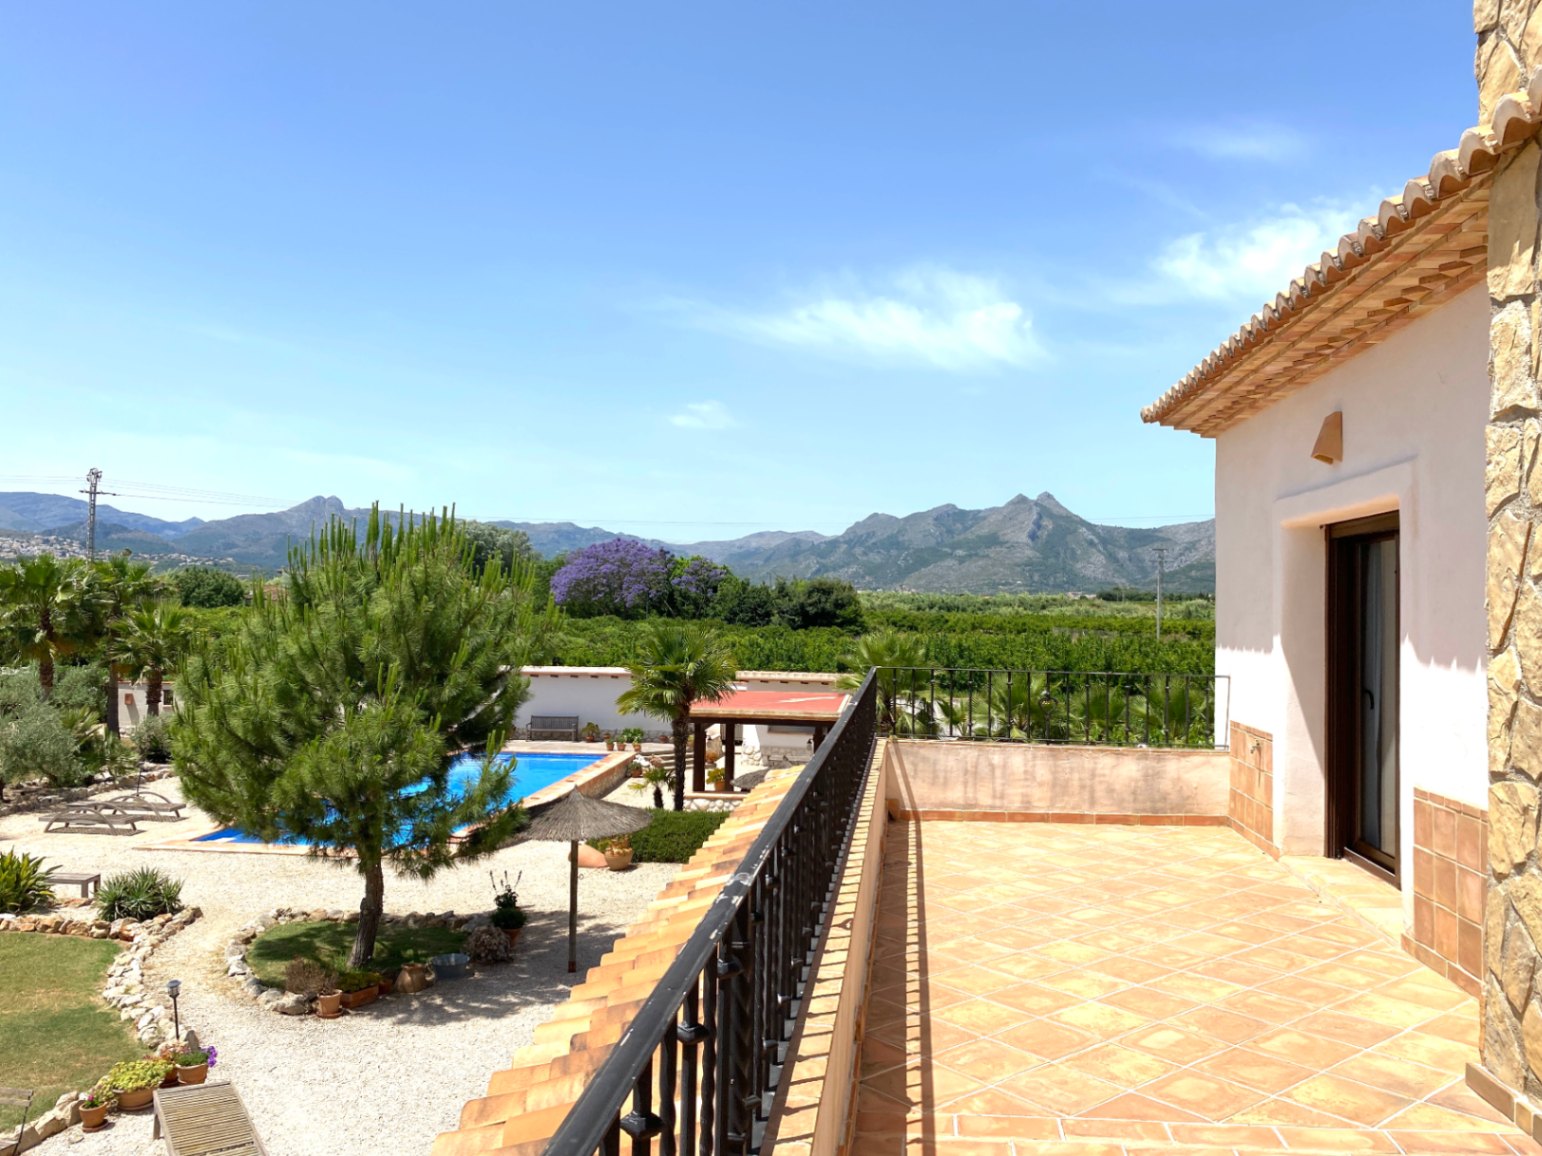 Finca with 5 bedrooms and 5 bathrooms en suite, 3 further bathrooms outside.